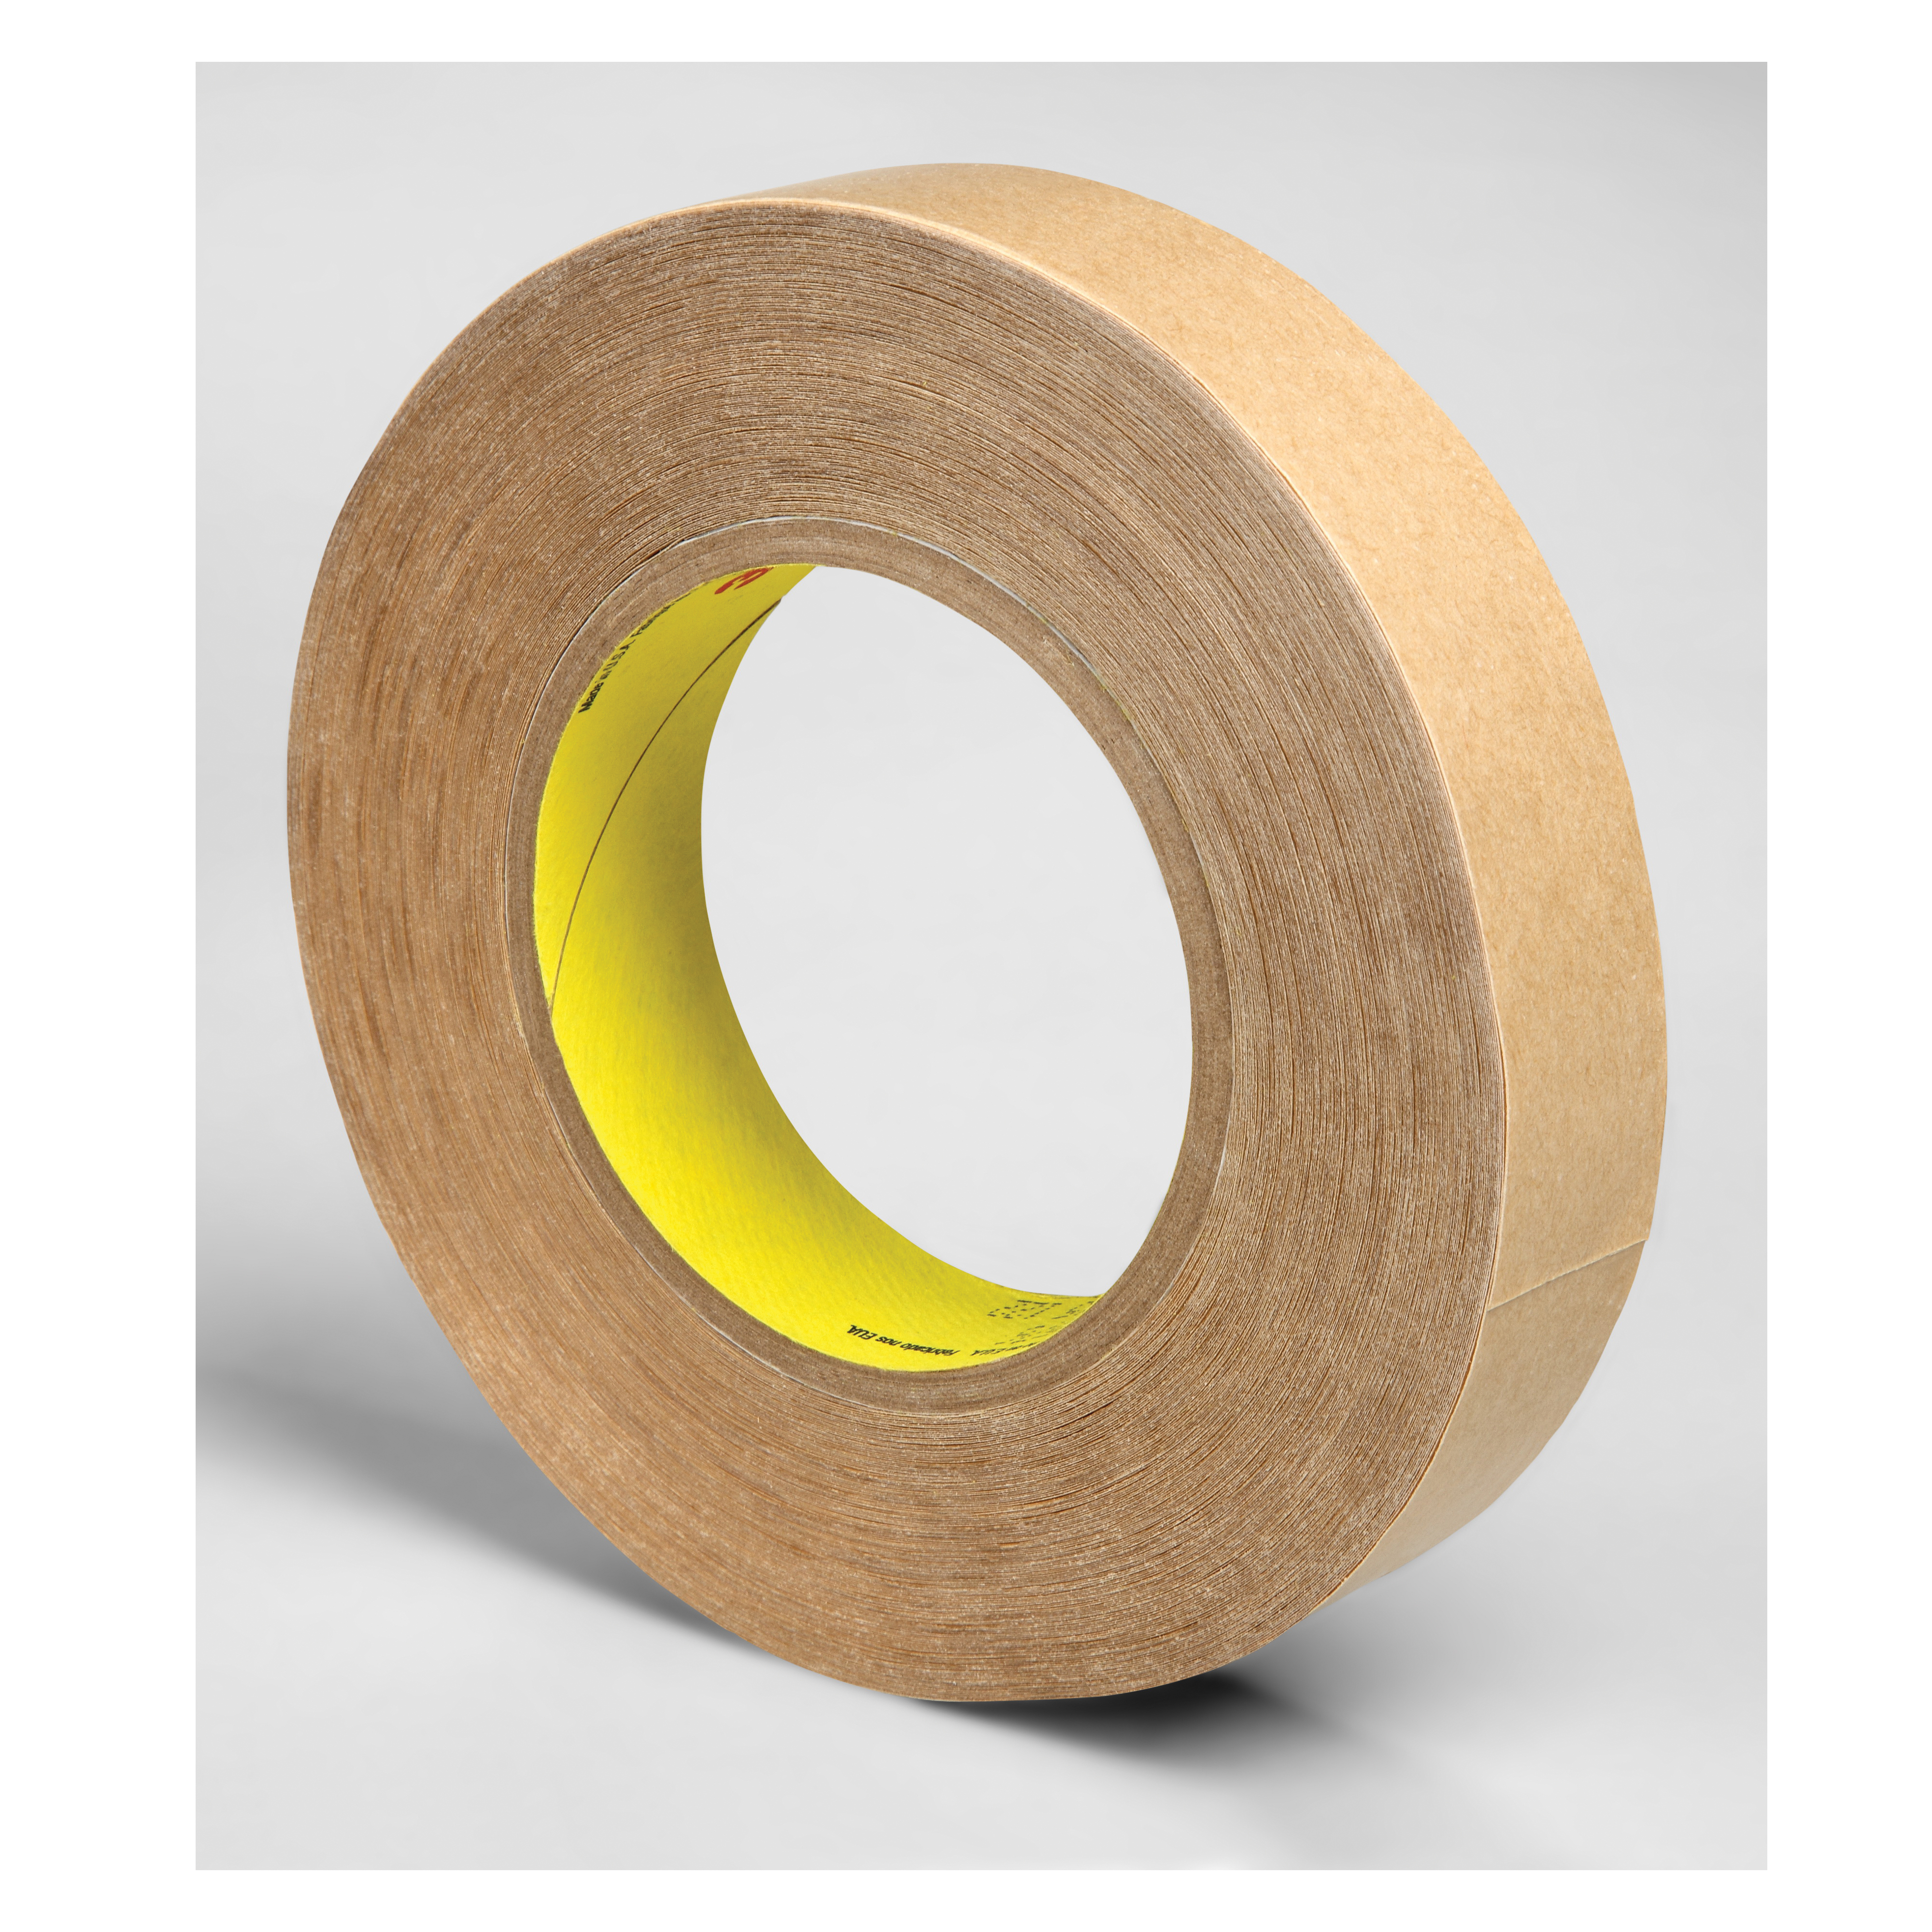 3M™ 021200-84266 Double Coated Tape, 60 yd L x 1 in W, 4 mil THK, 400HT Acrylic Adhesive, Polypropylene Backing, Clear